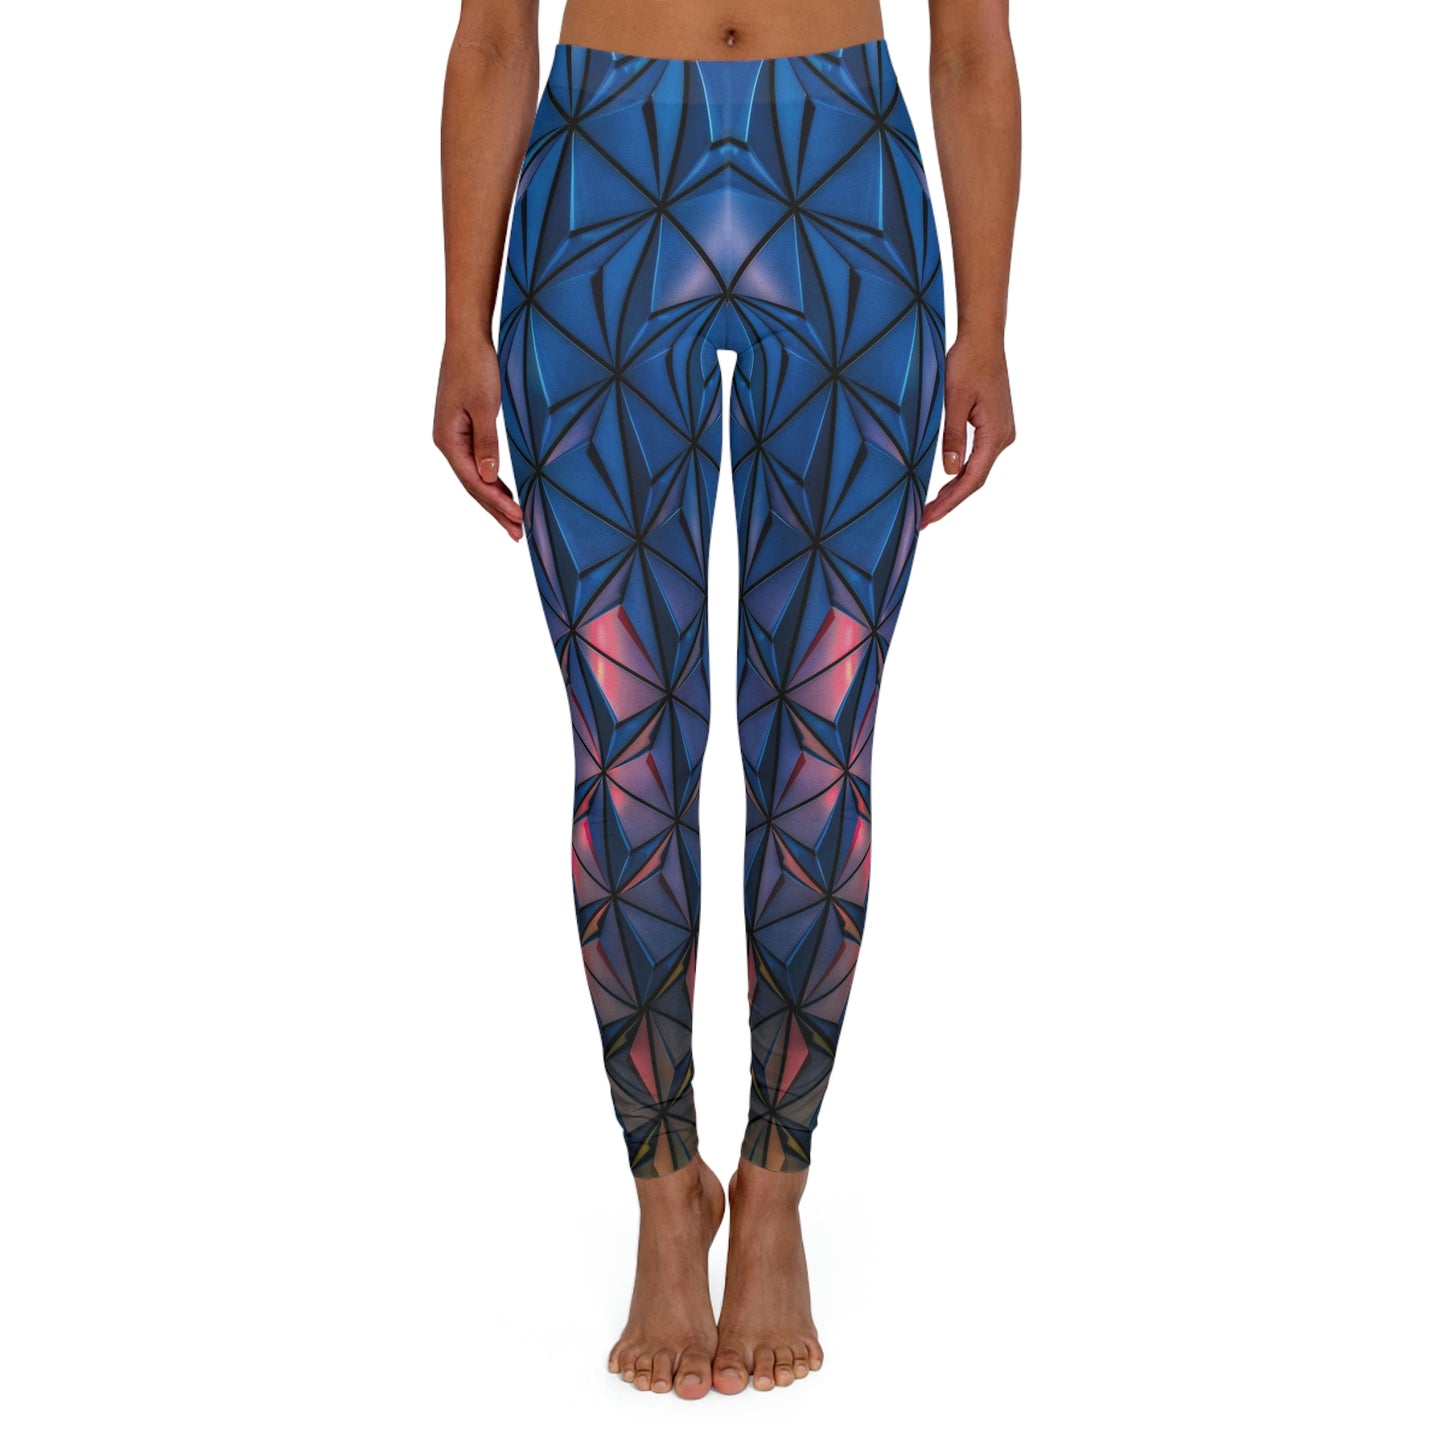 Robot Women's  Leggings Plus Size Leggings One of a Kind Gift - Unique Workout Activewear tights for Mom fitness, Mothers Day, Girlfriend Christmas Gift